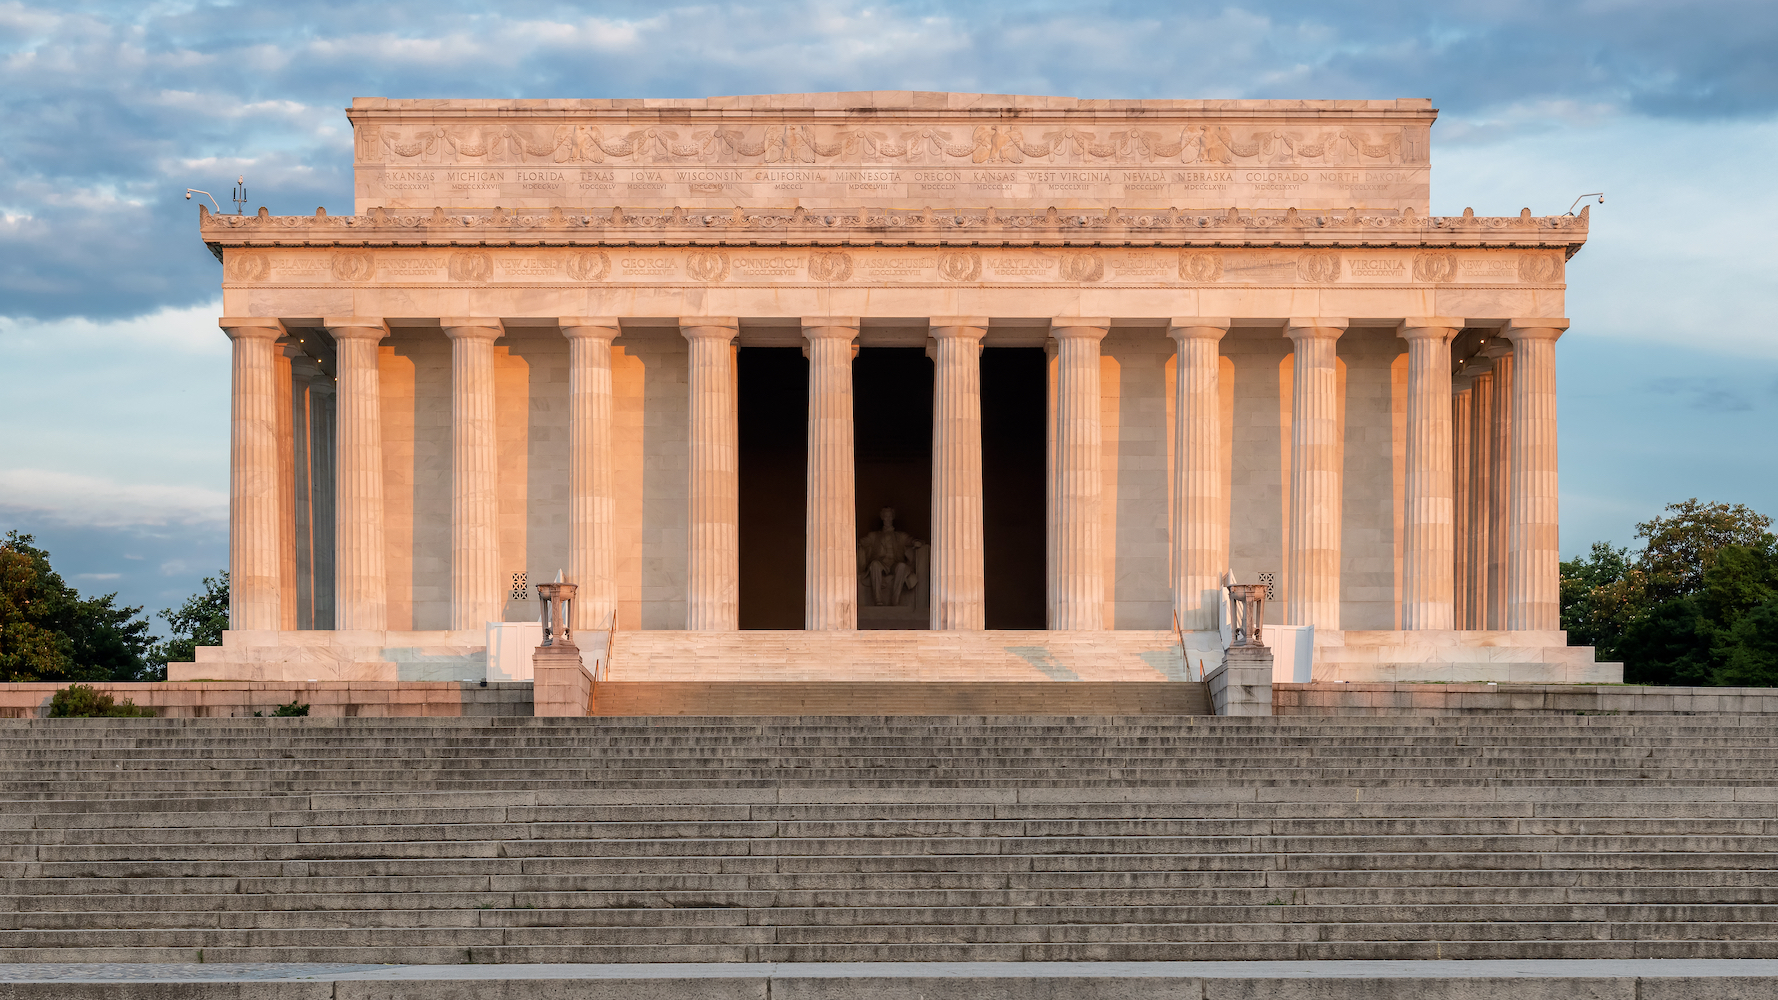 National Park Service Reveals Plan to Tuck Exhibition Space Beneath Lincoln Memorial